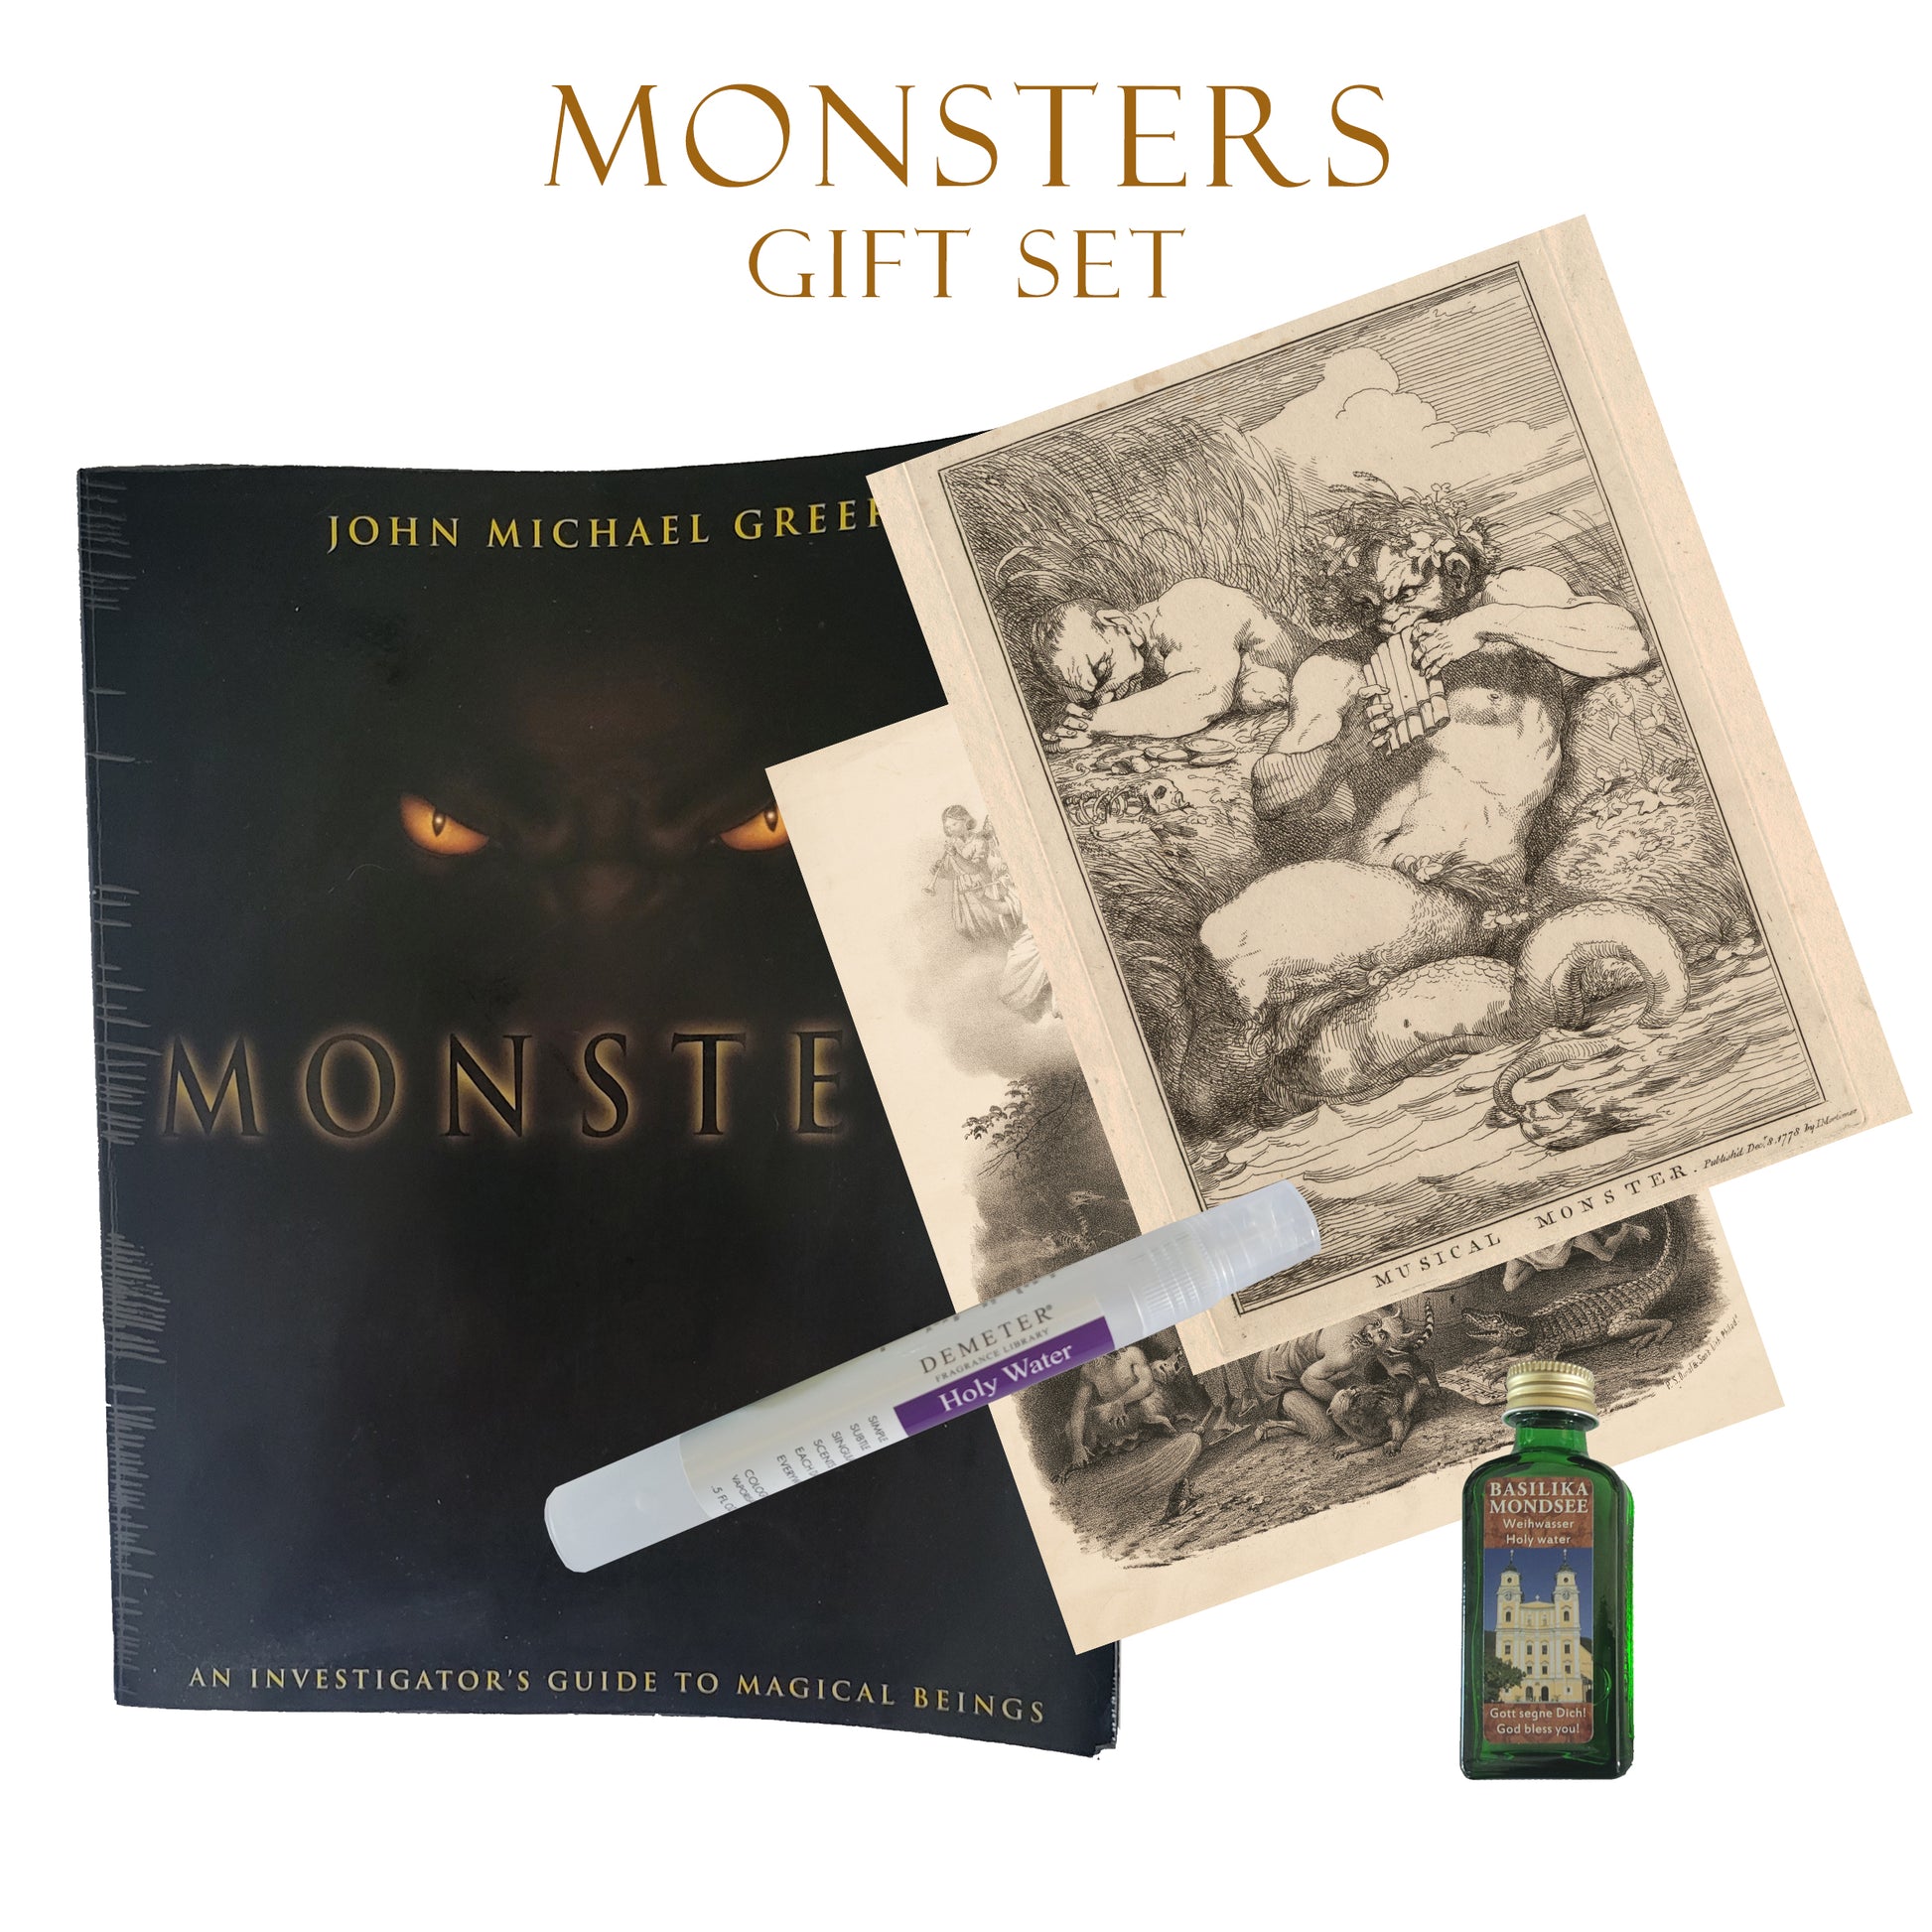 Monster’s gift set for the supernatural and paranormal lover in your life, includes 8” x 10” photograph of an angels and demons lithograph by James Fuller Queen, 1857-1867 and Musical Monster monographic by John Hamilton Mortimer, 1778, real holy water from Mondsee, Austria, and the Holy Water fragrance spray by Demeter.